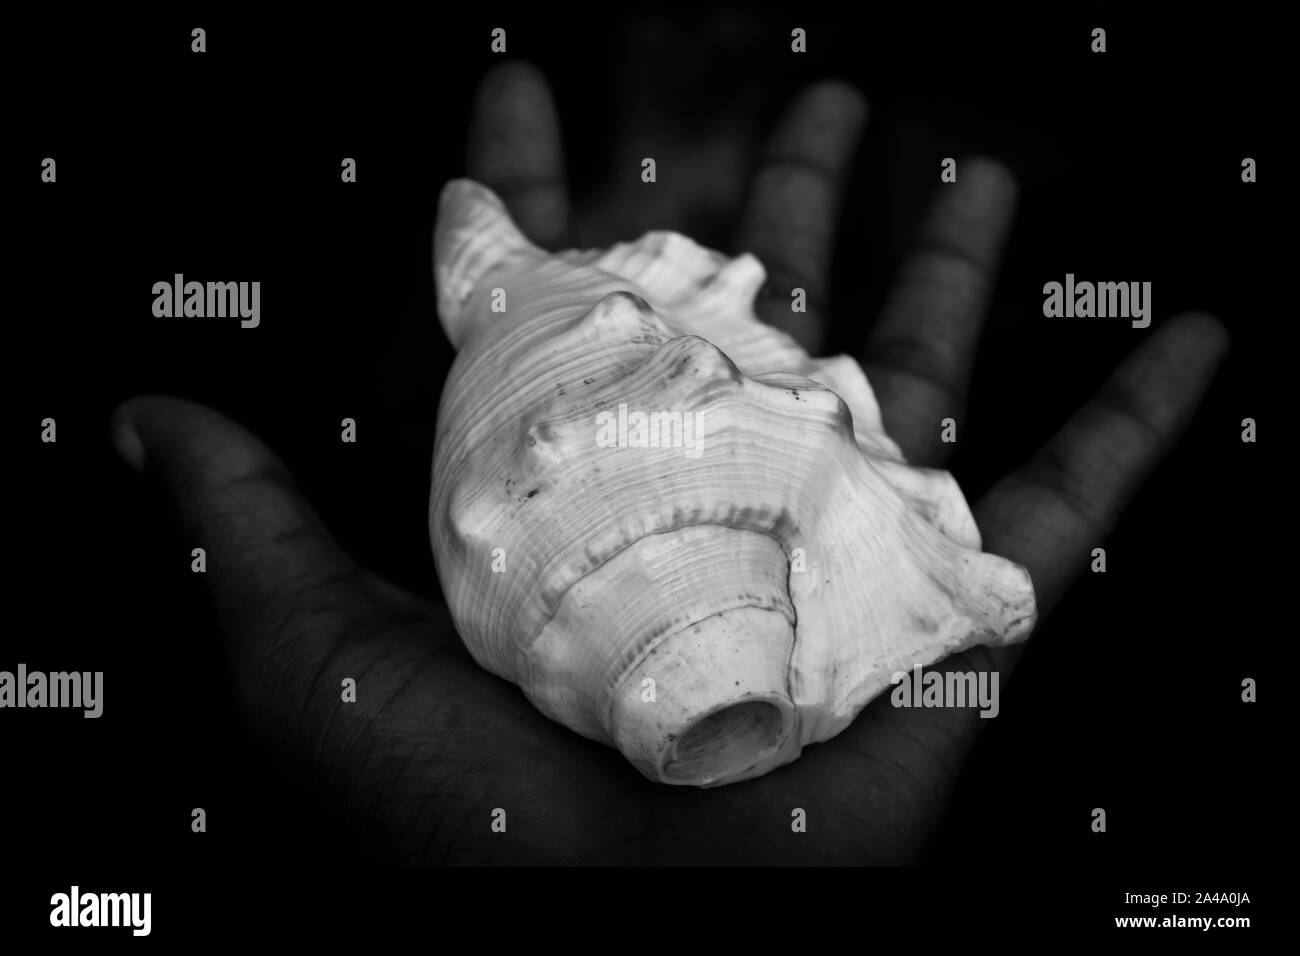 Indian, Holy, white, conch shell, (Shankha), in hand.A Shankha is a conch shell of ritual and religious importance in Hinduism and Buddhism. Stock Photo